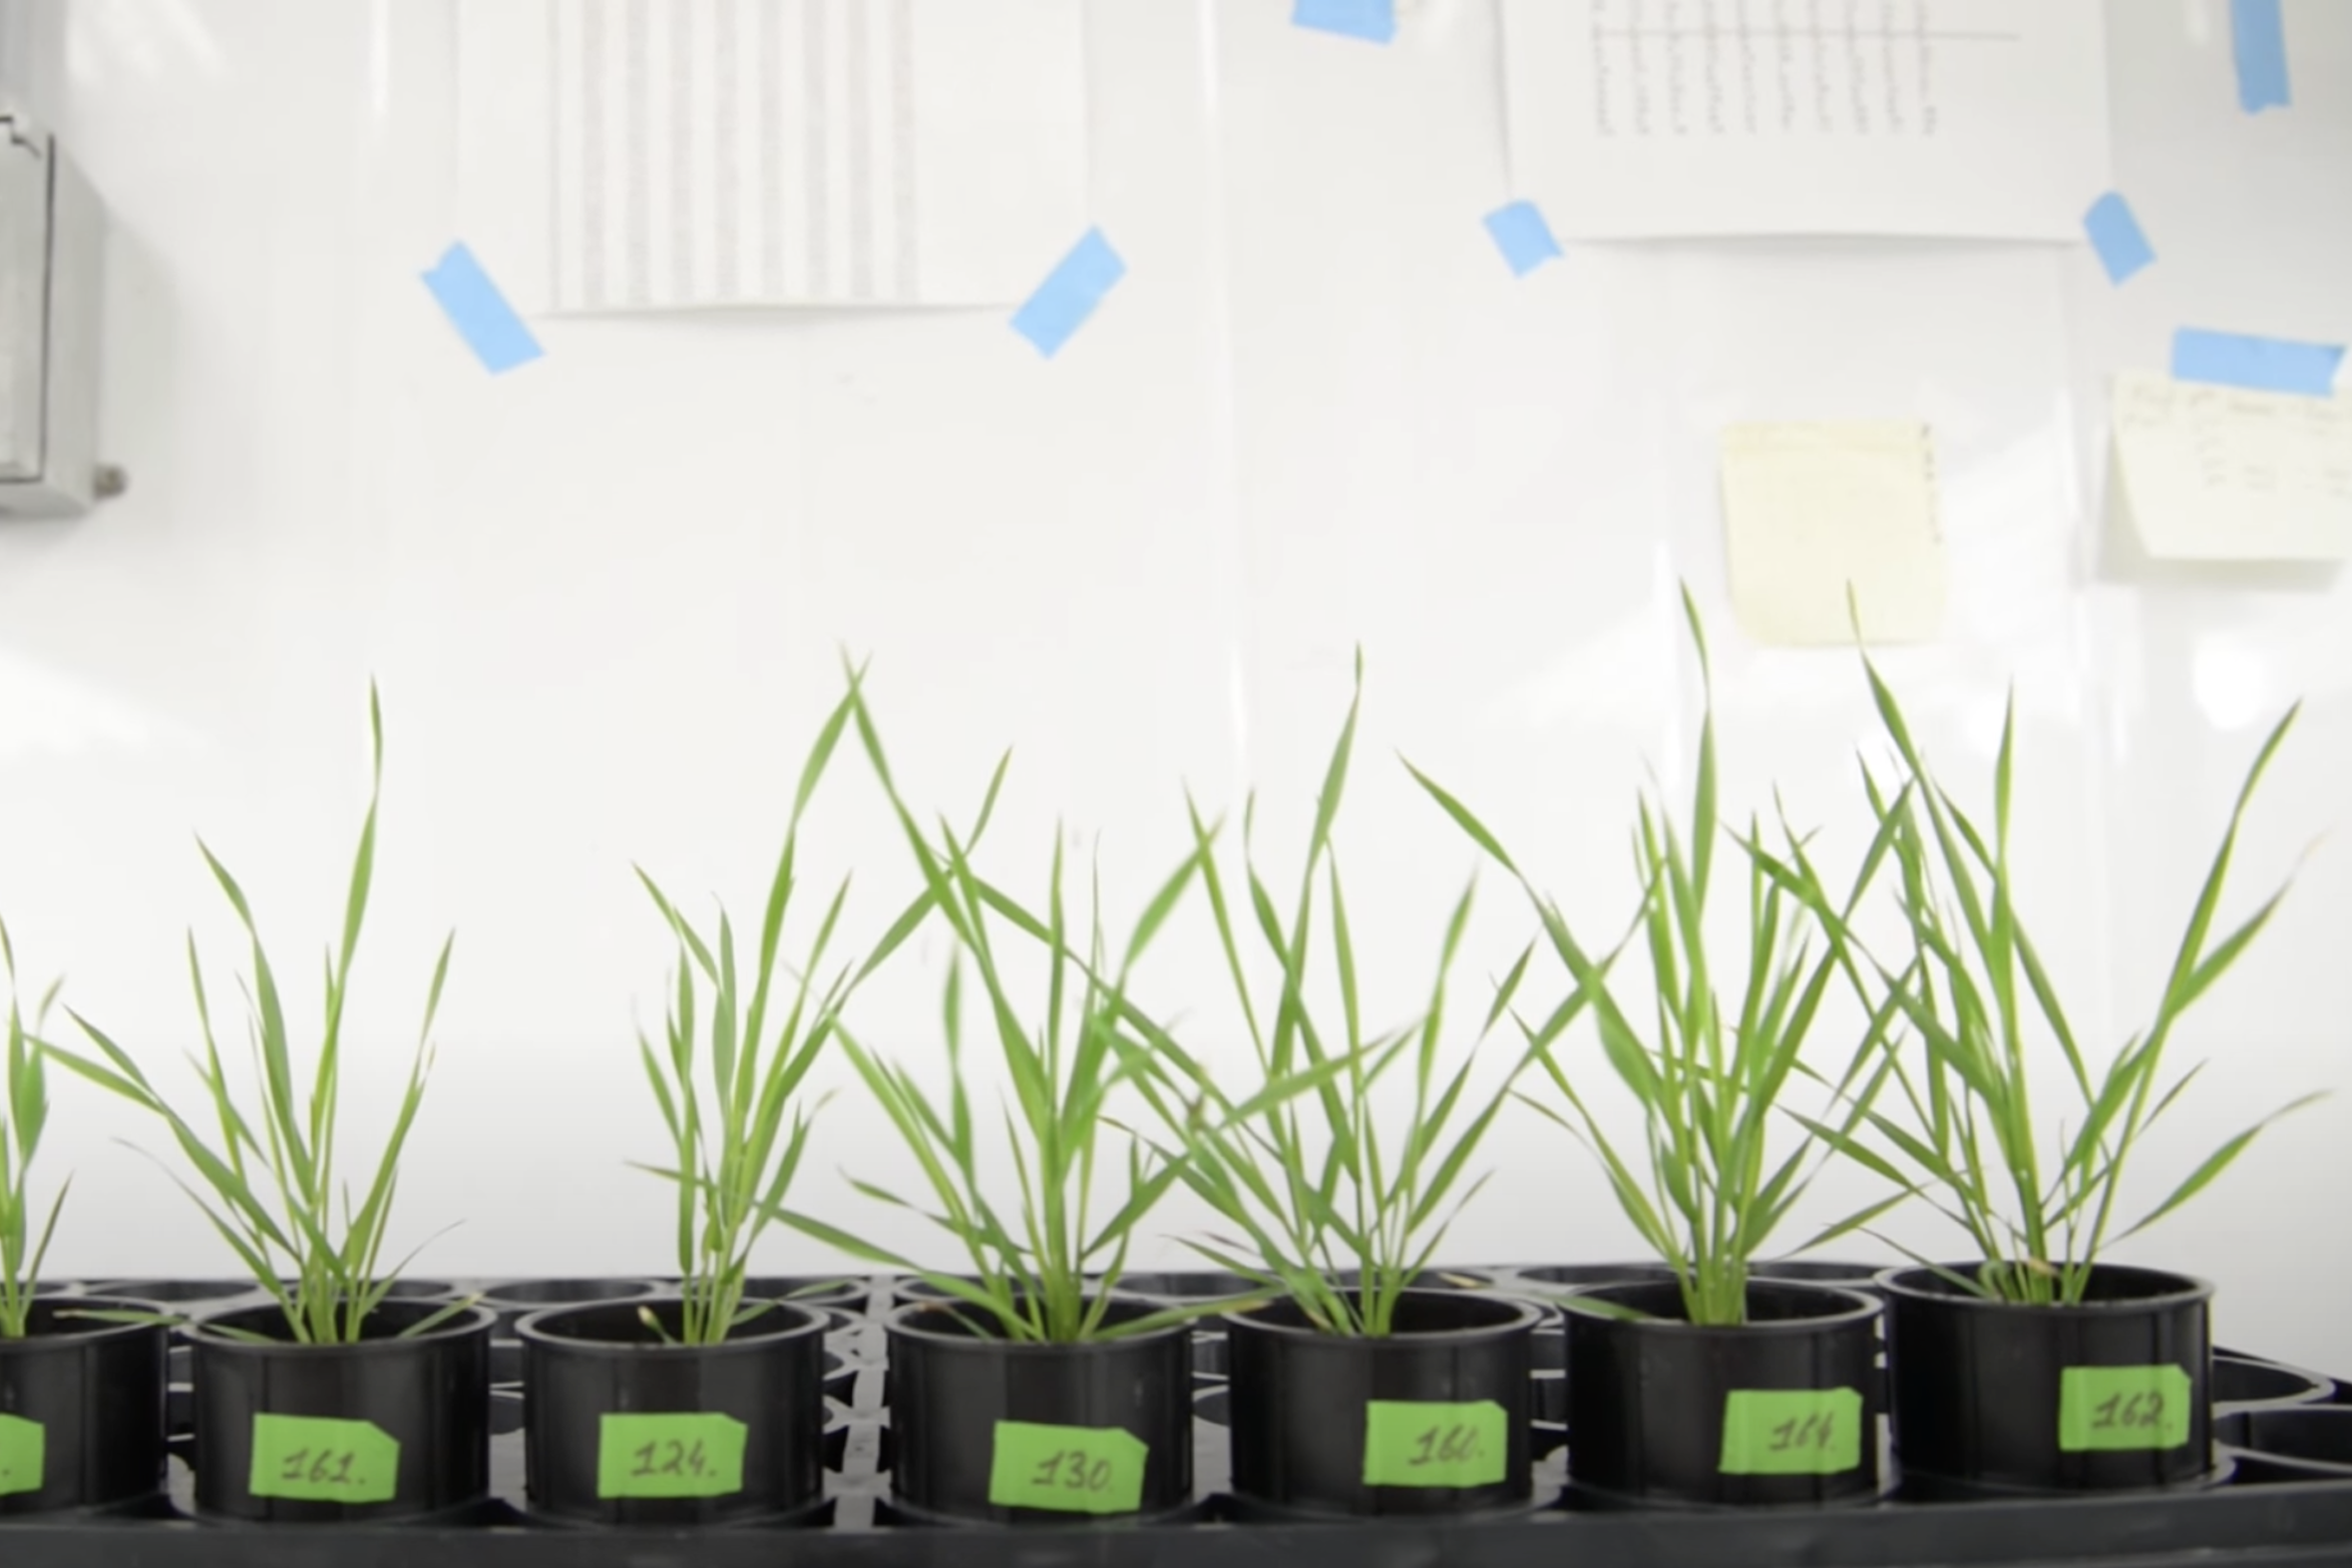 A row of 8 plants growing and flourishing at levels to varying degrees appear in front of a wall in an academic setting